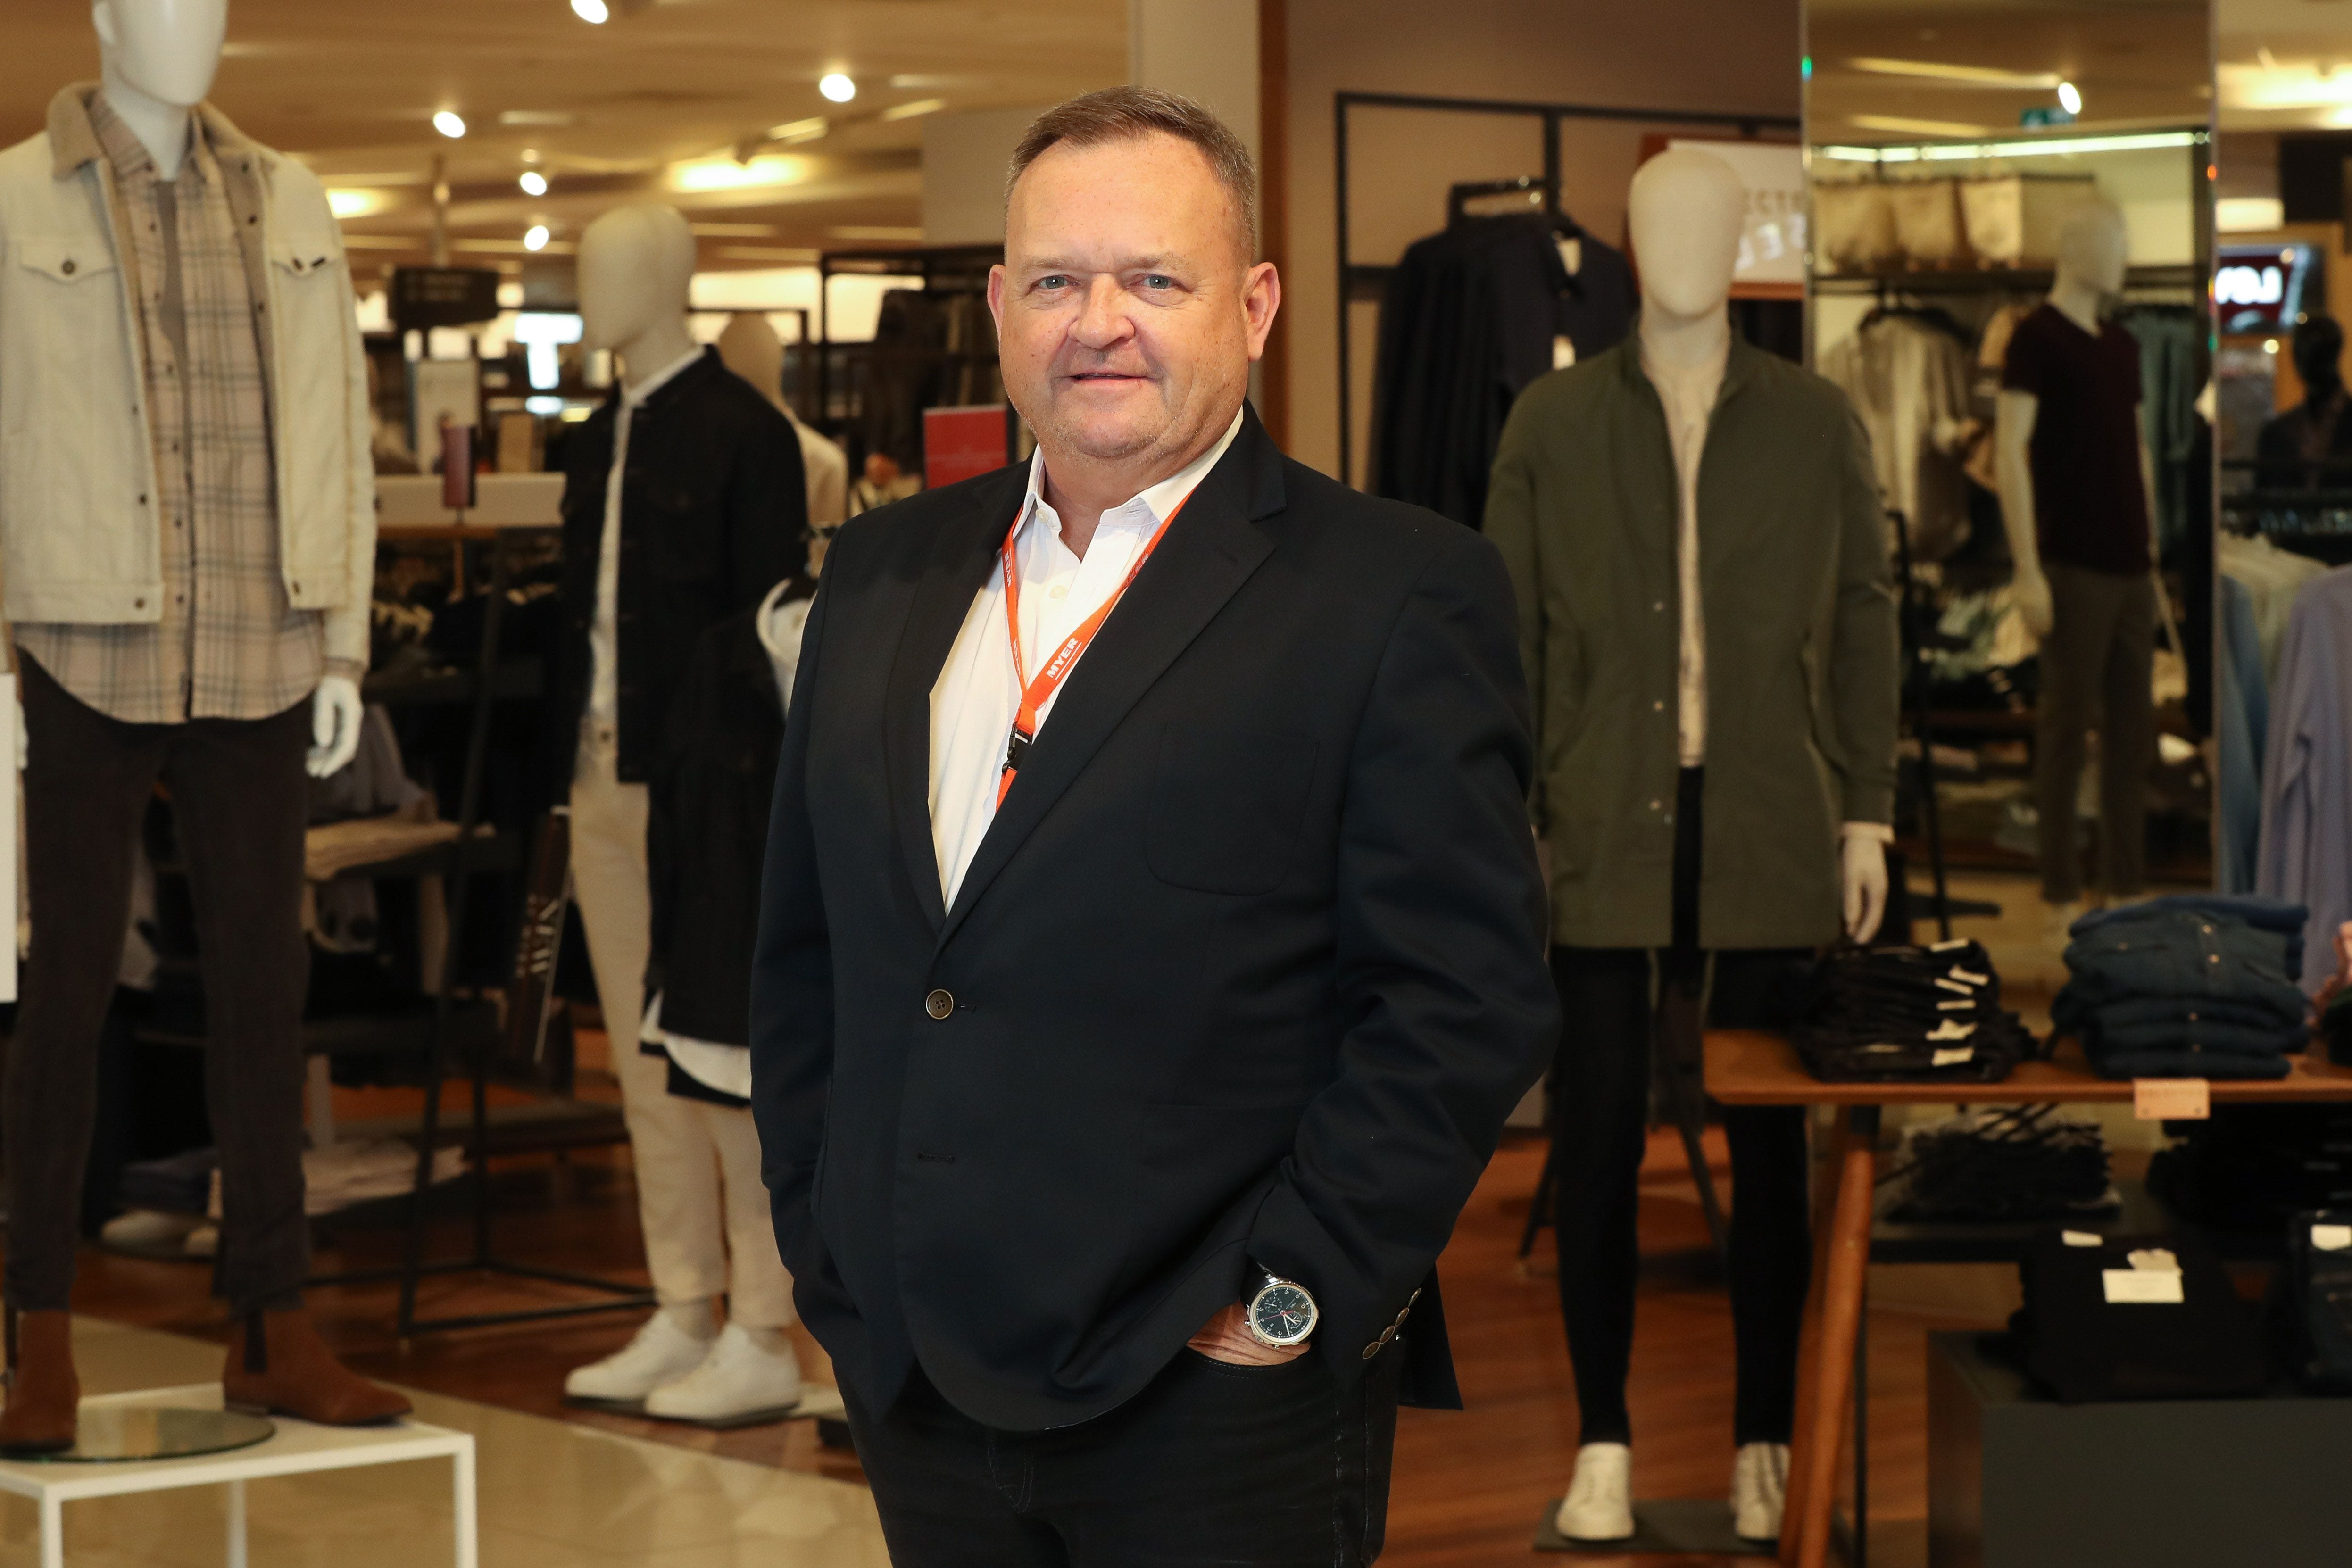 Turnaround CEO John King plans to leave Myer next year to focus on family